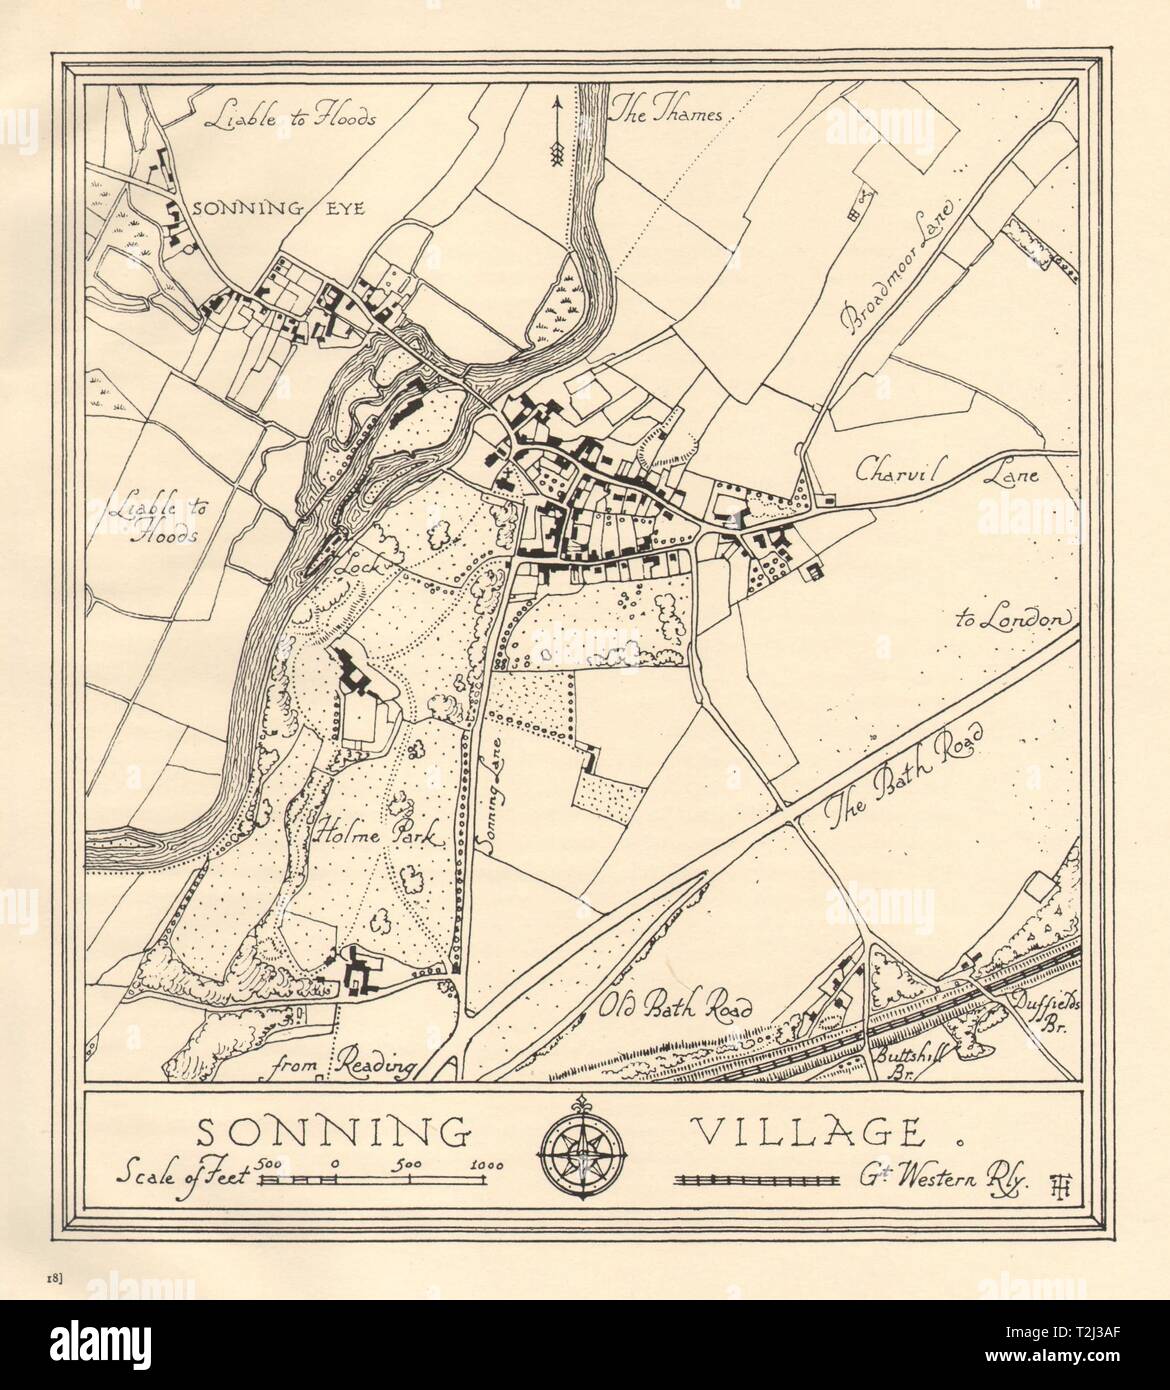 Town plan of SONNING village, Berkshire. Thames Valley 1929 old vintage map Stock Photo